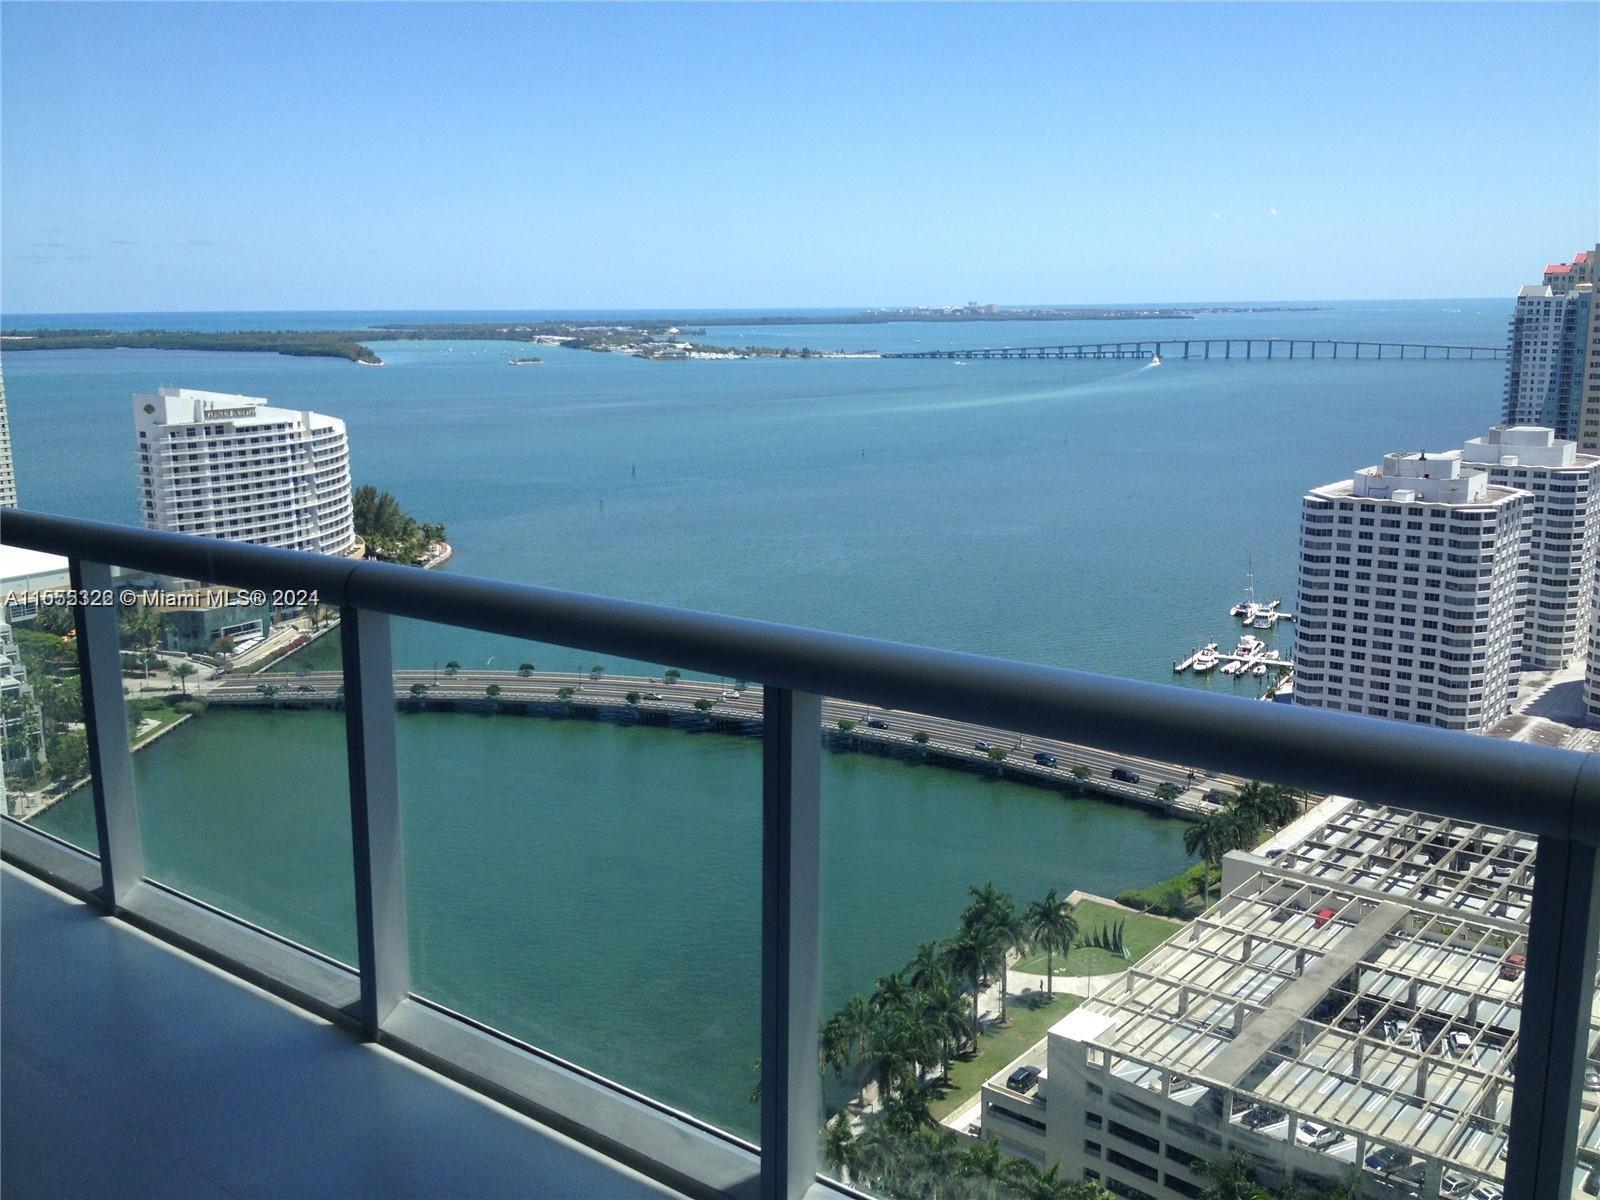 Breathtaking view of Biscayne Bay from one of the largest 1bedrooms at Icon Brickell. Great layout, 